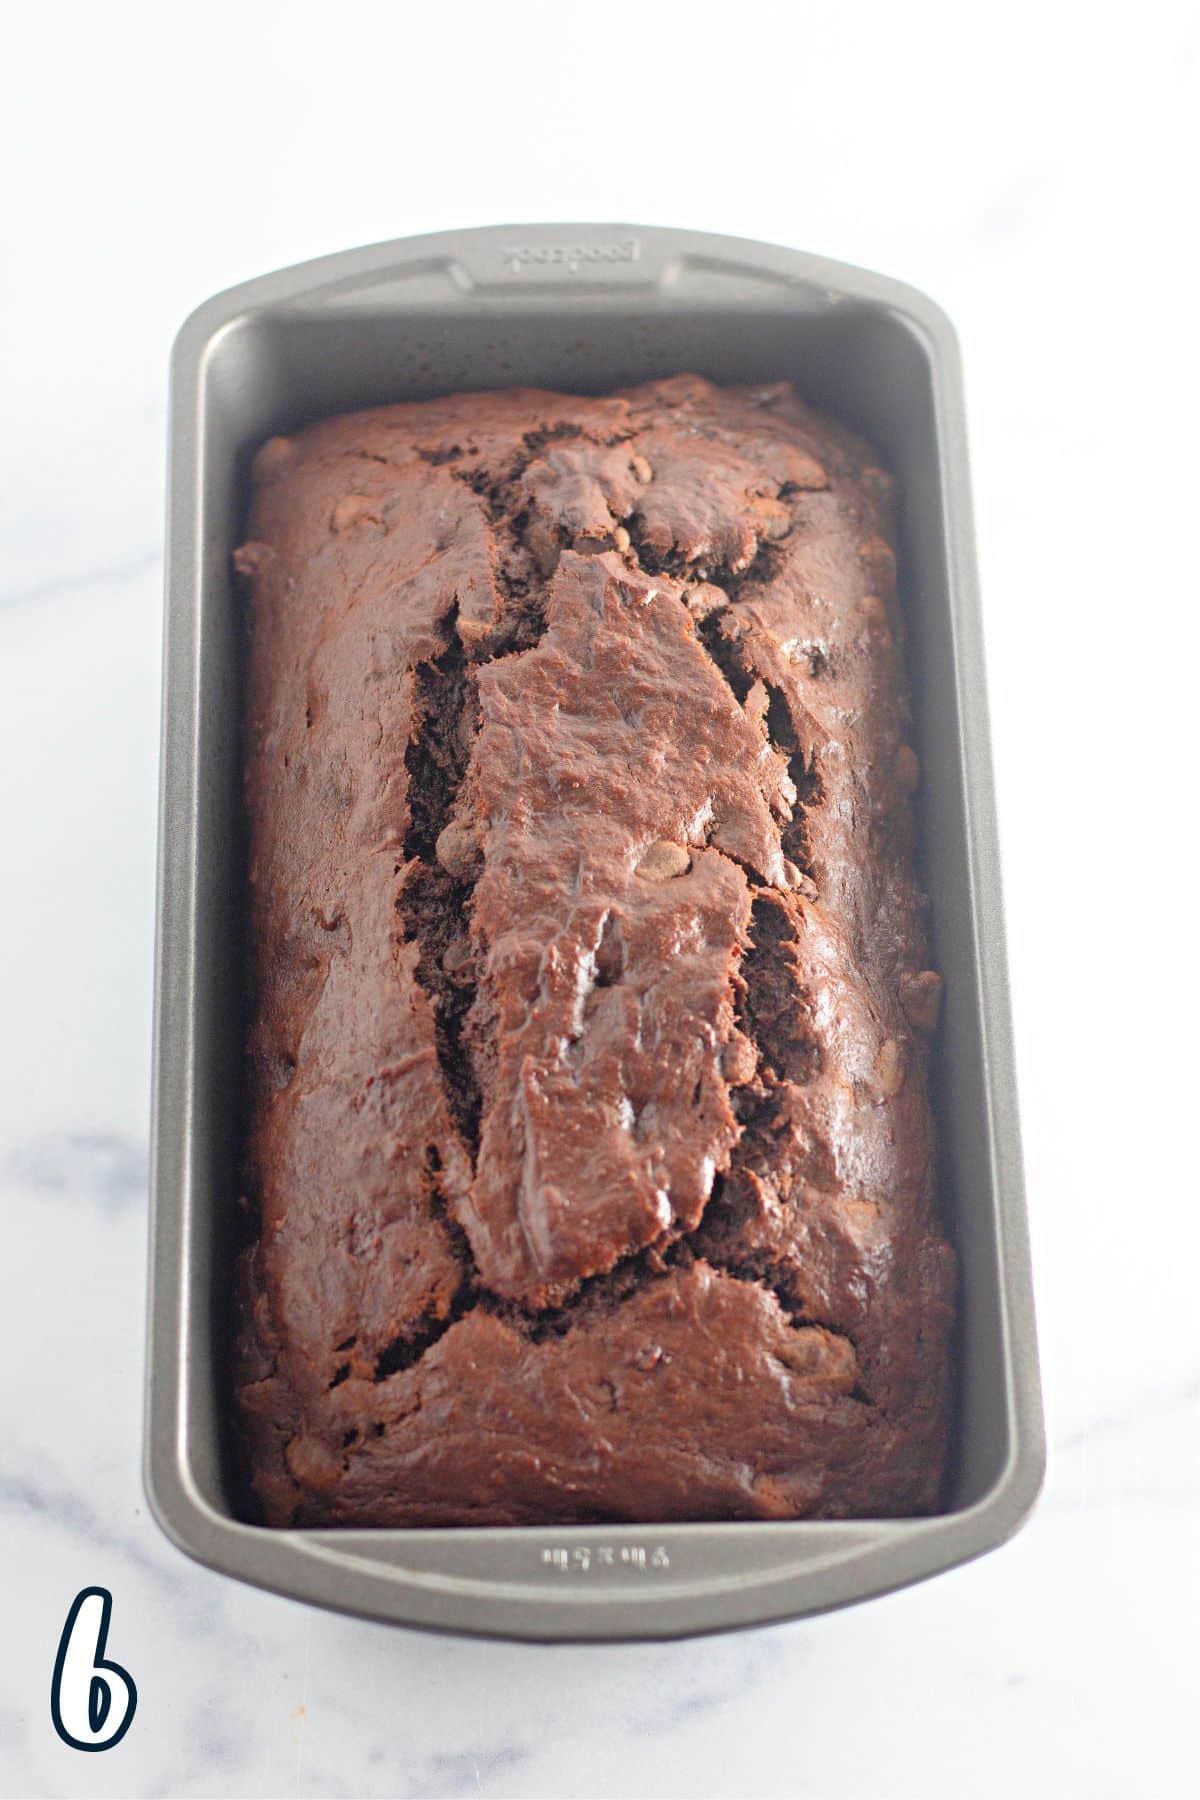 A just baked loaf of chocolate banana bread in a pan.